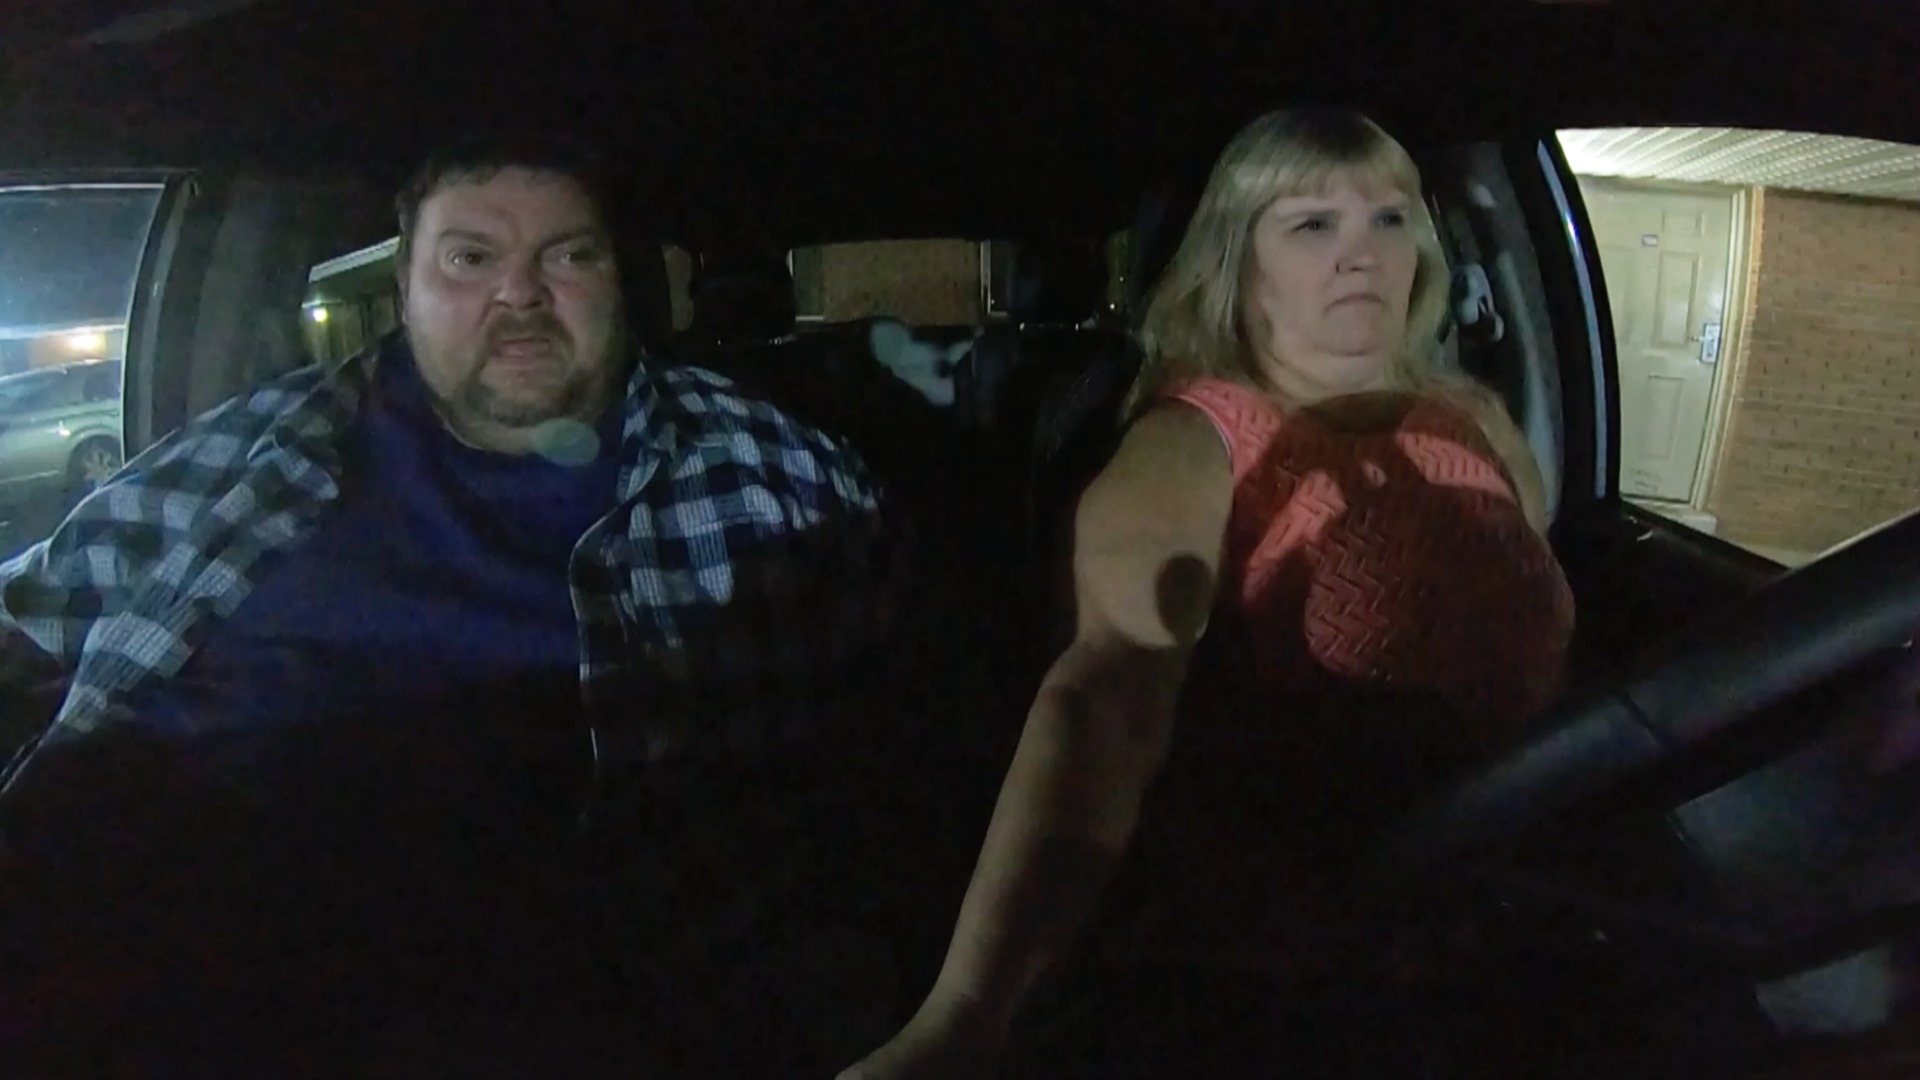 Watch Sneak Peek: Doe Doe's Stakeout Gets Serious | Mama June: From Not to Hot Video Extras